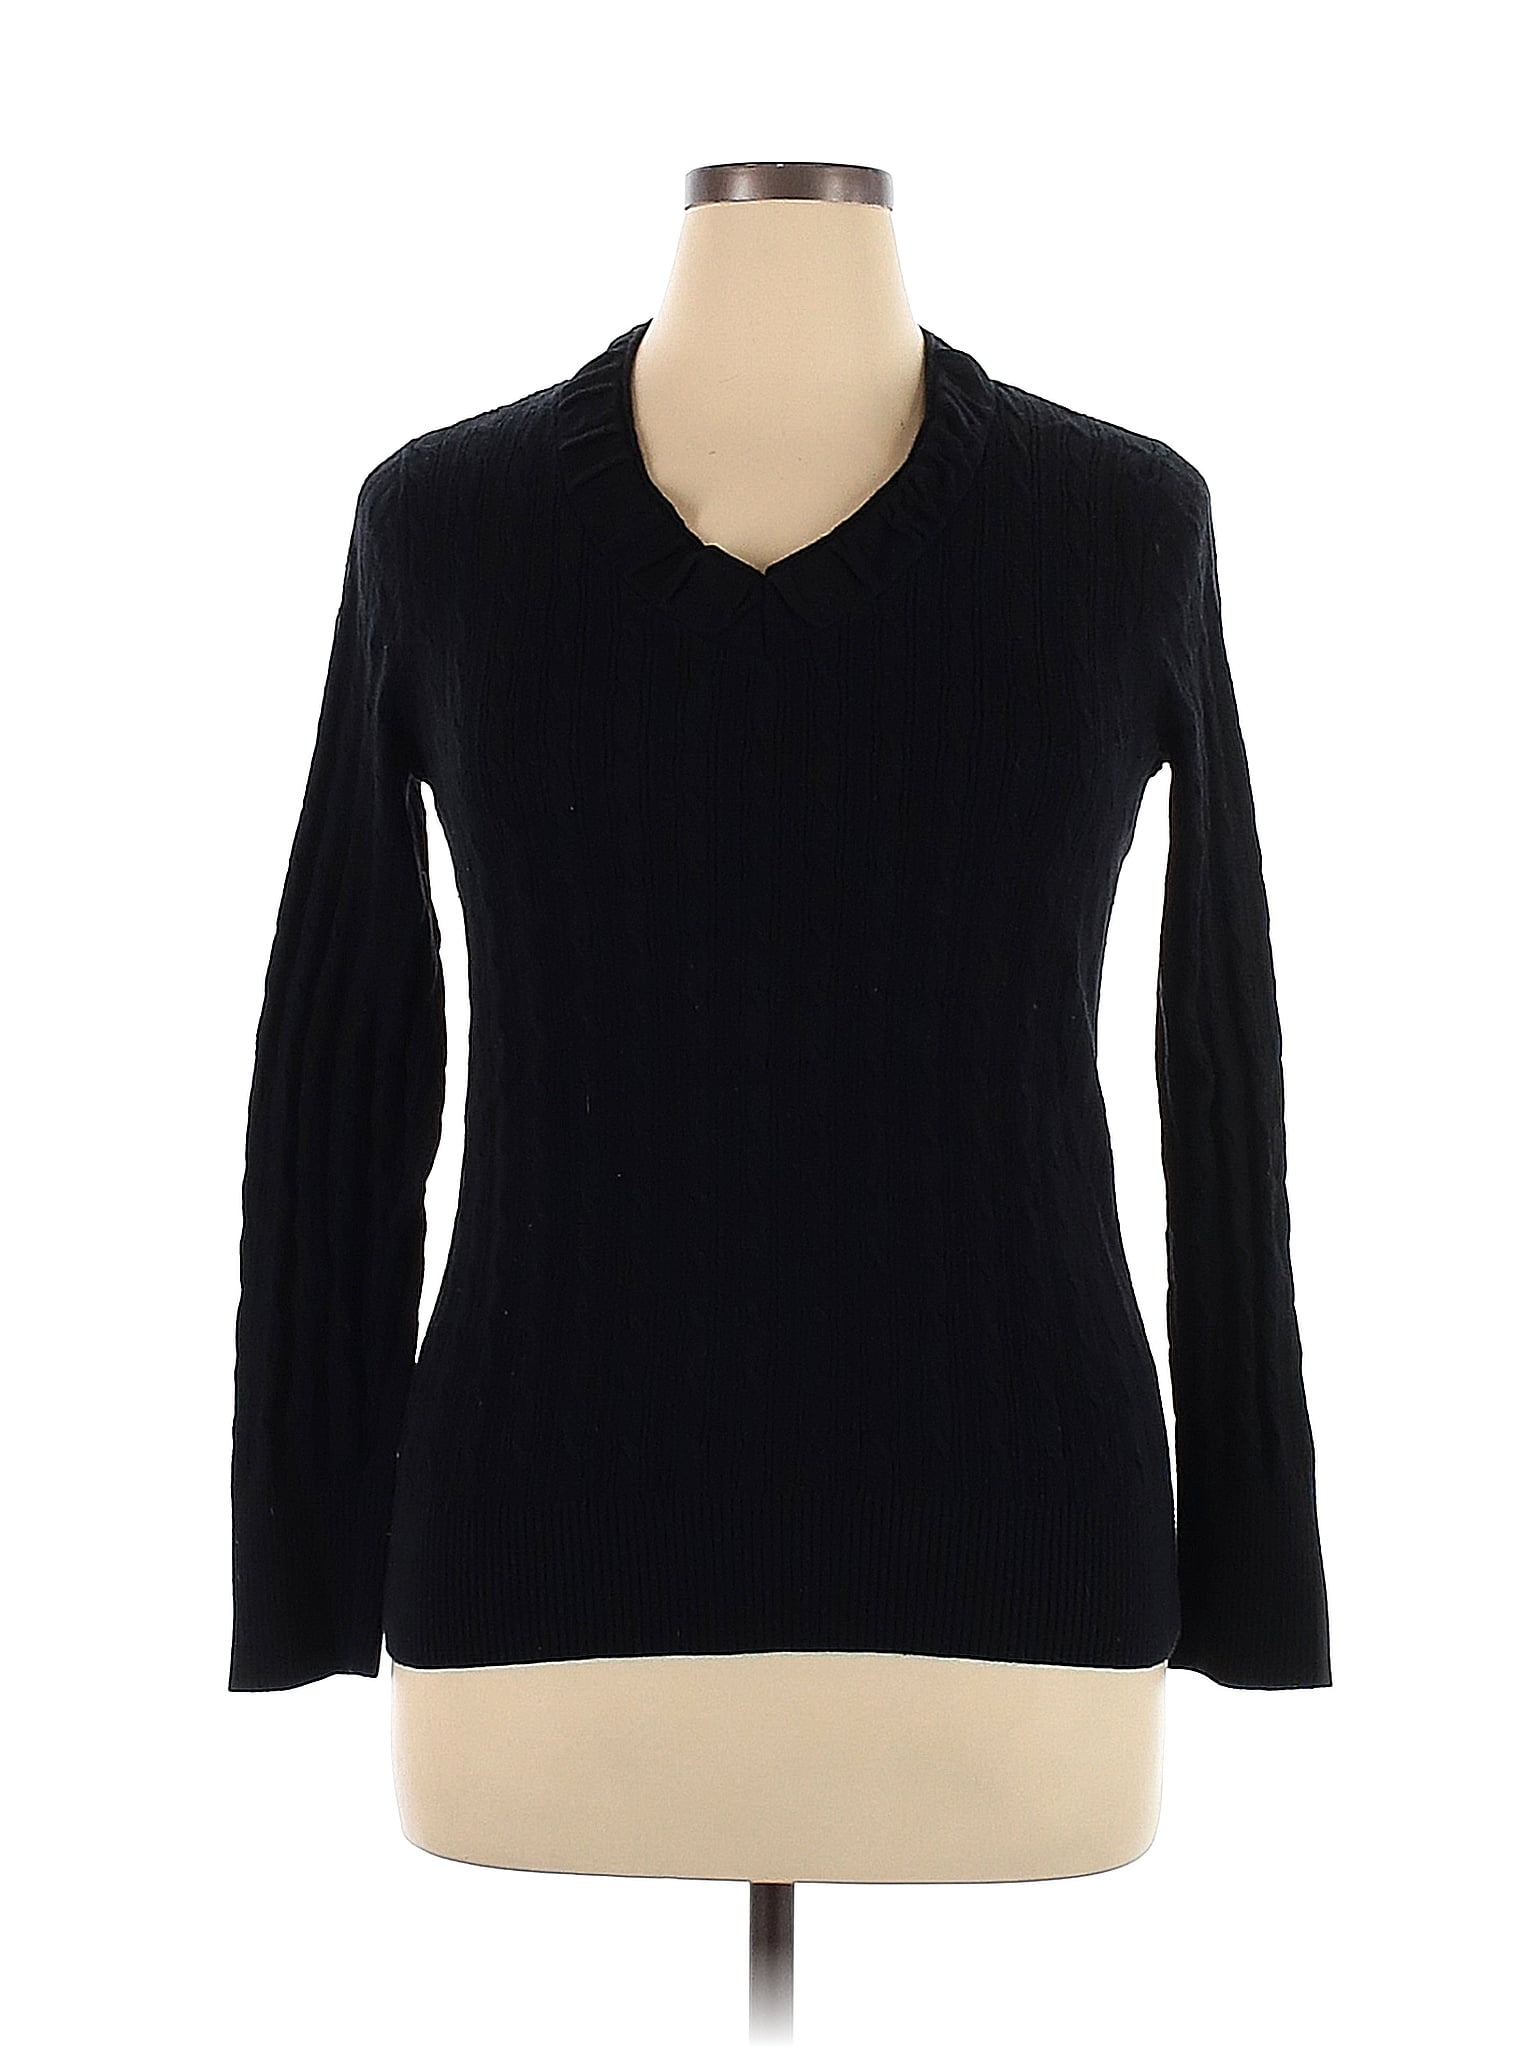 Eddie Bauer Color Block Solid Black Pullover Sweater Size XL - 69% off ...